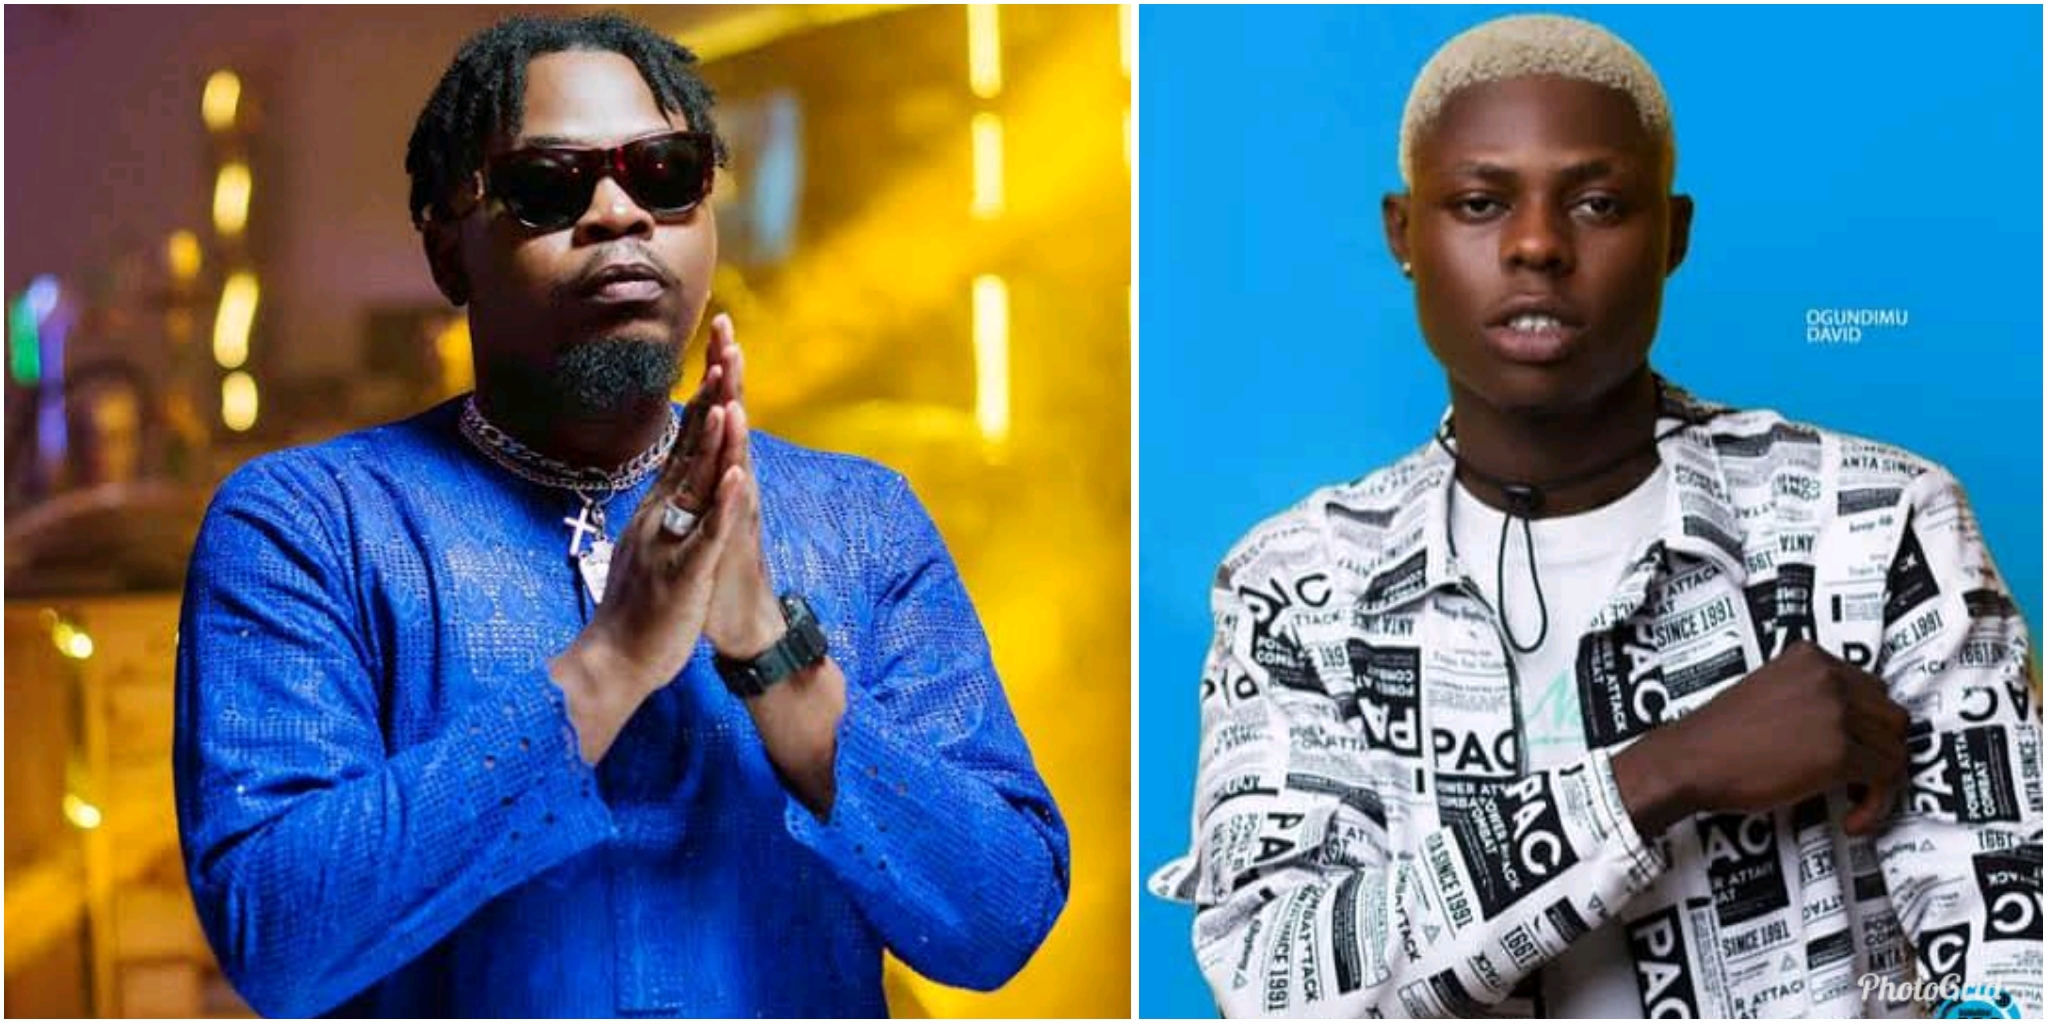 “So it’s true” – Olamide’s reaction to Mohbad’s sudden death stirs emotions online